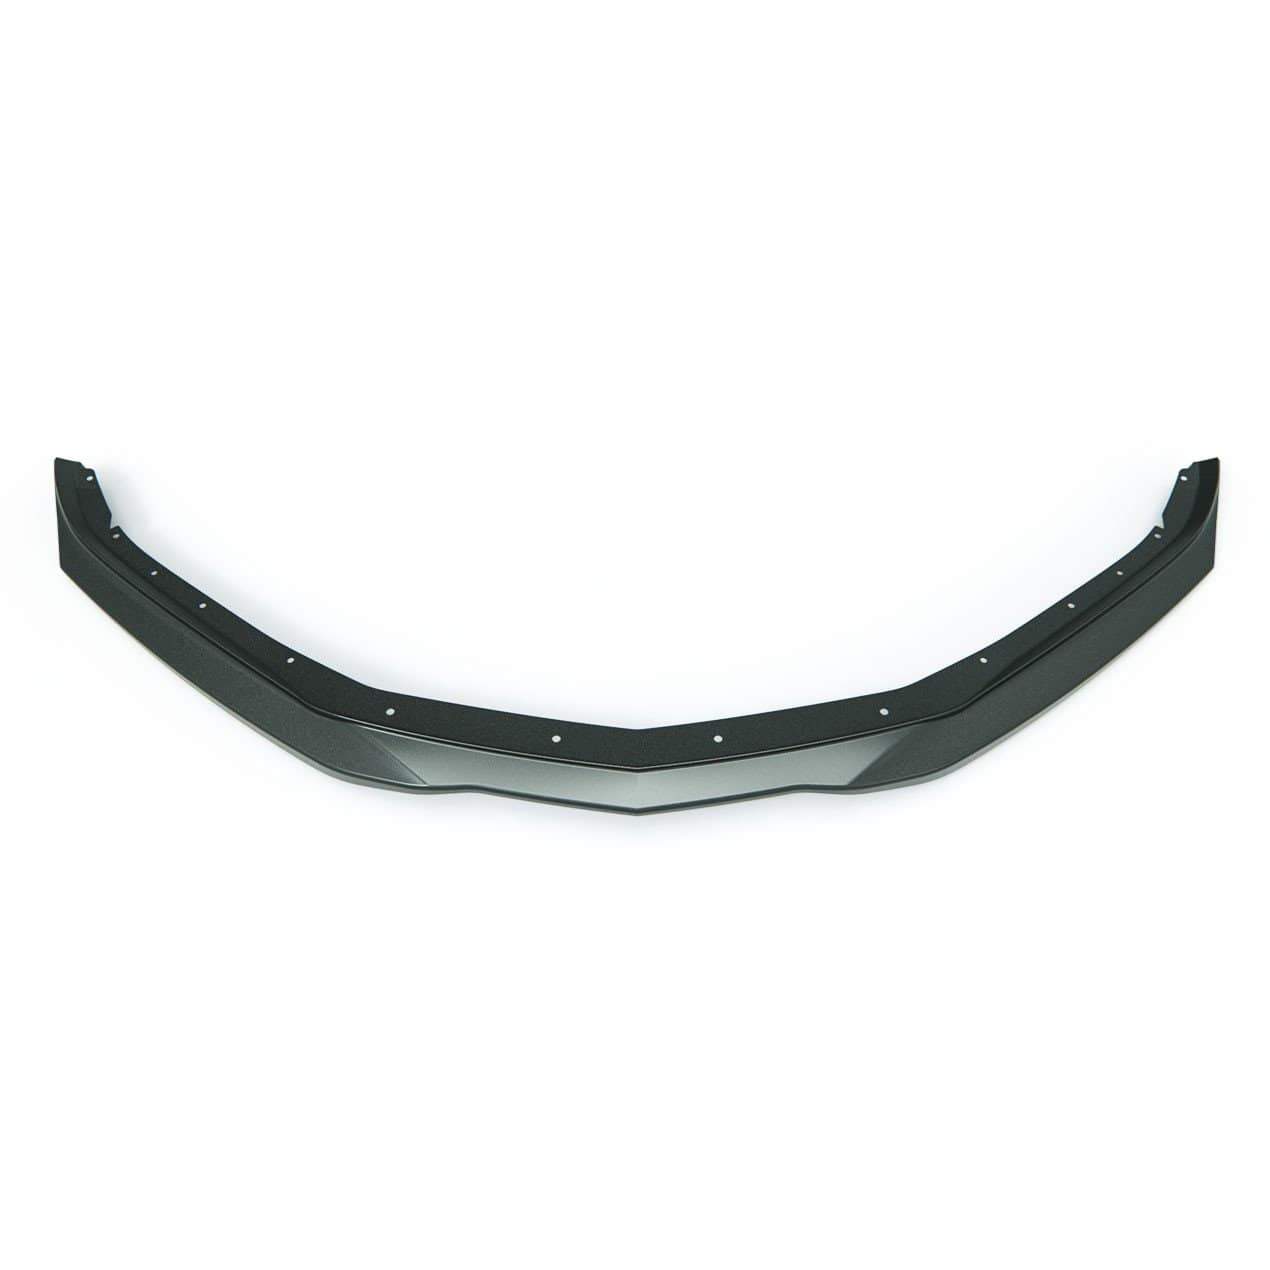 ACS Composite T6 Front Splitter in Primer with No Endcaps for Camaro 2019+ [48-4-001]PRM.